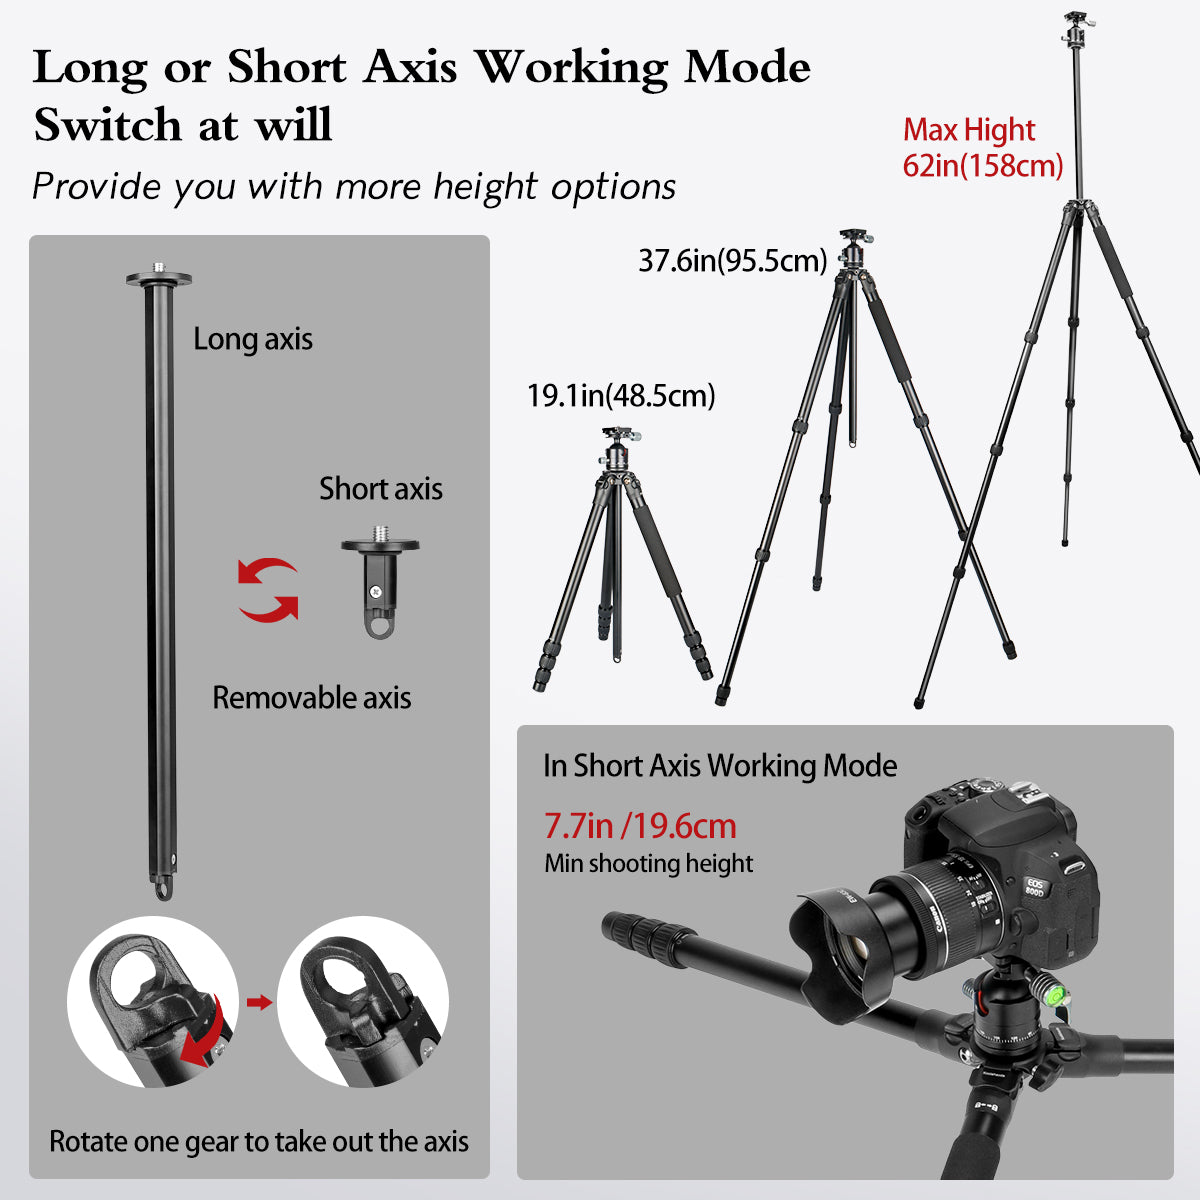 Camera Tripod 62inch Aluminum Portable Tripod Monopod Kit with 36mm Ball Head and Carrying Bag for DSLR Camera,Loading Up to 33lbs /15kg